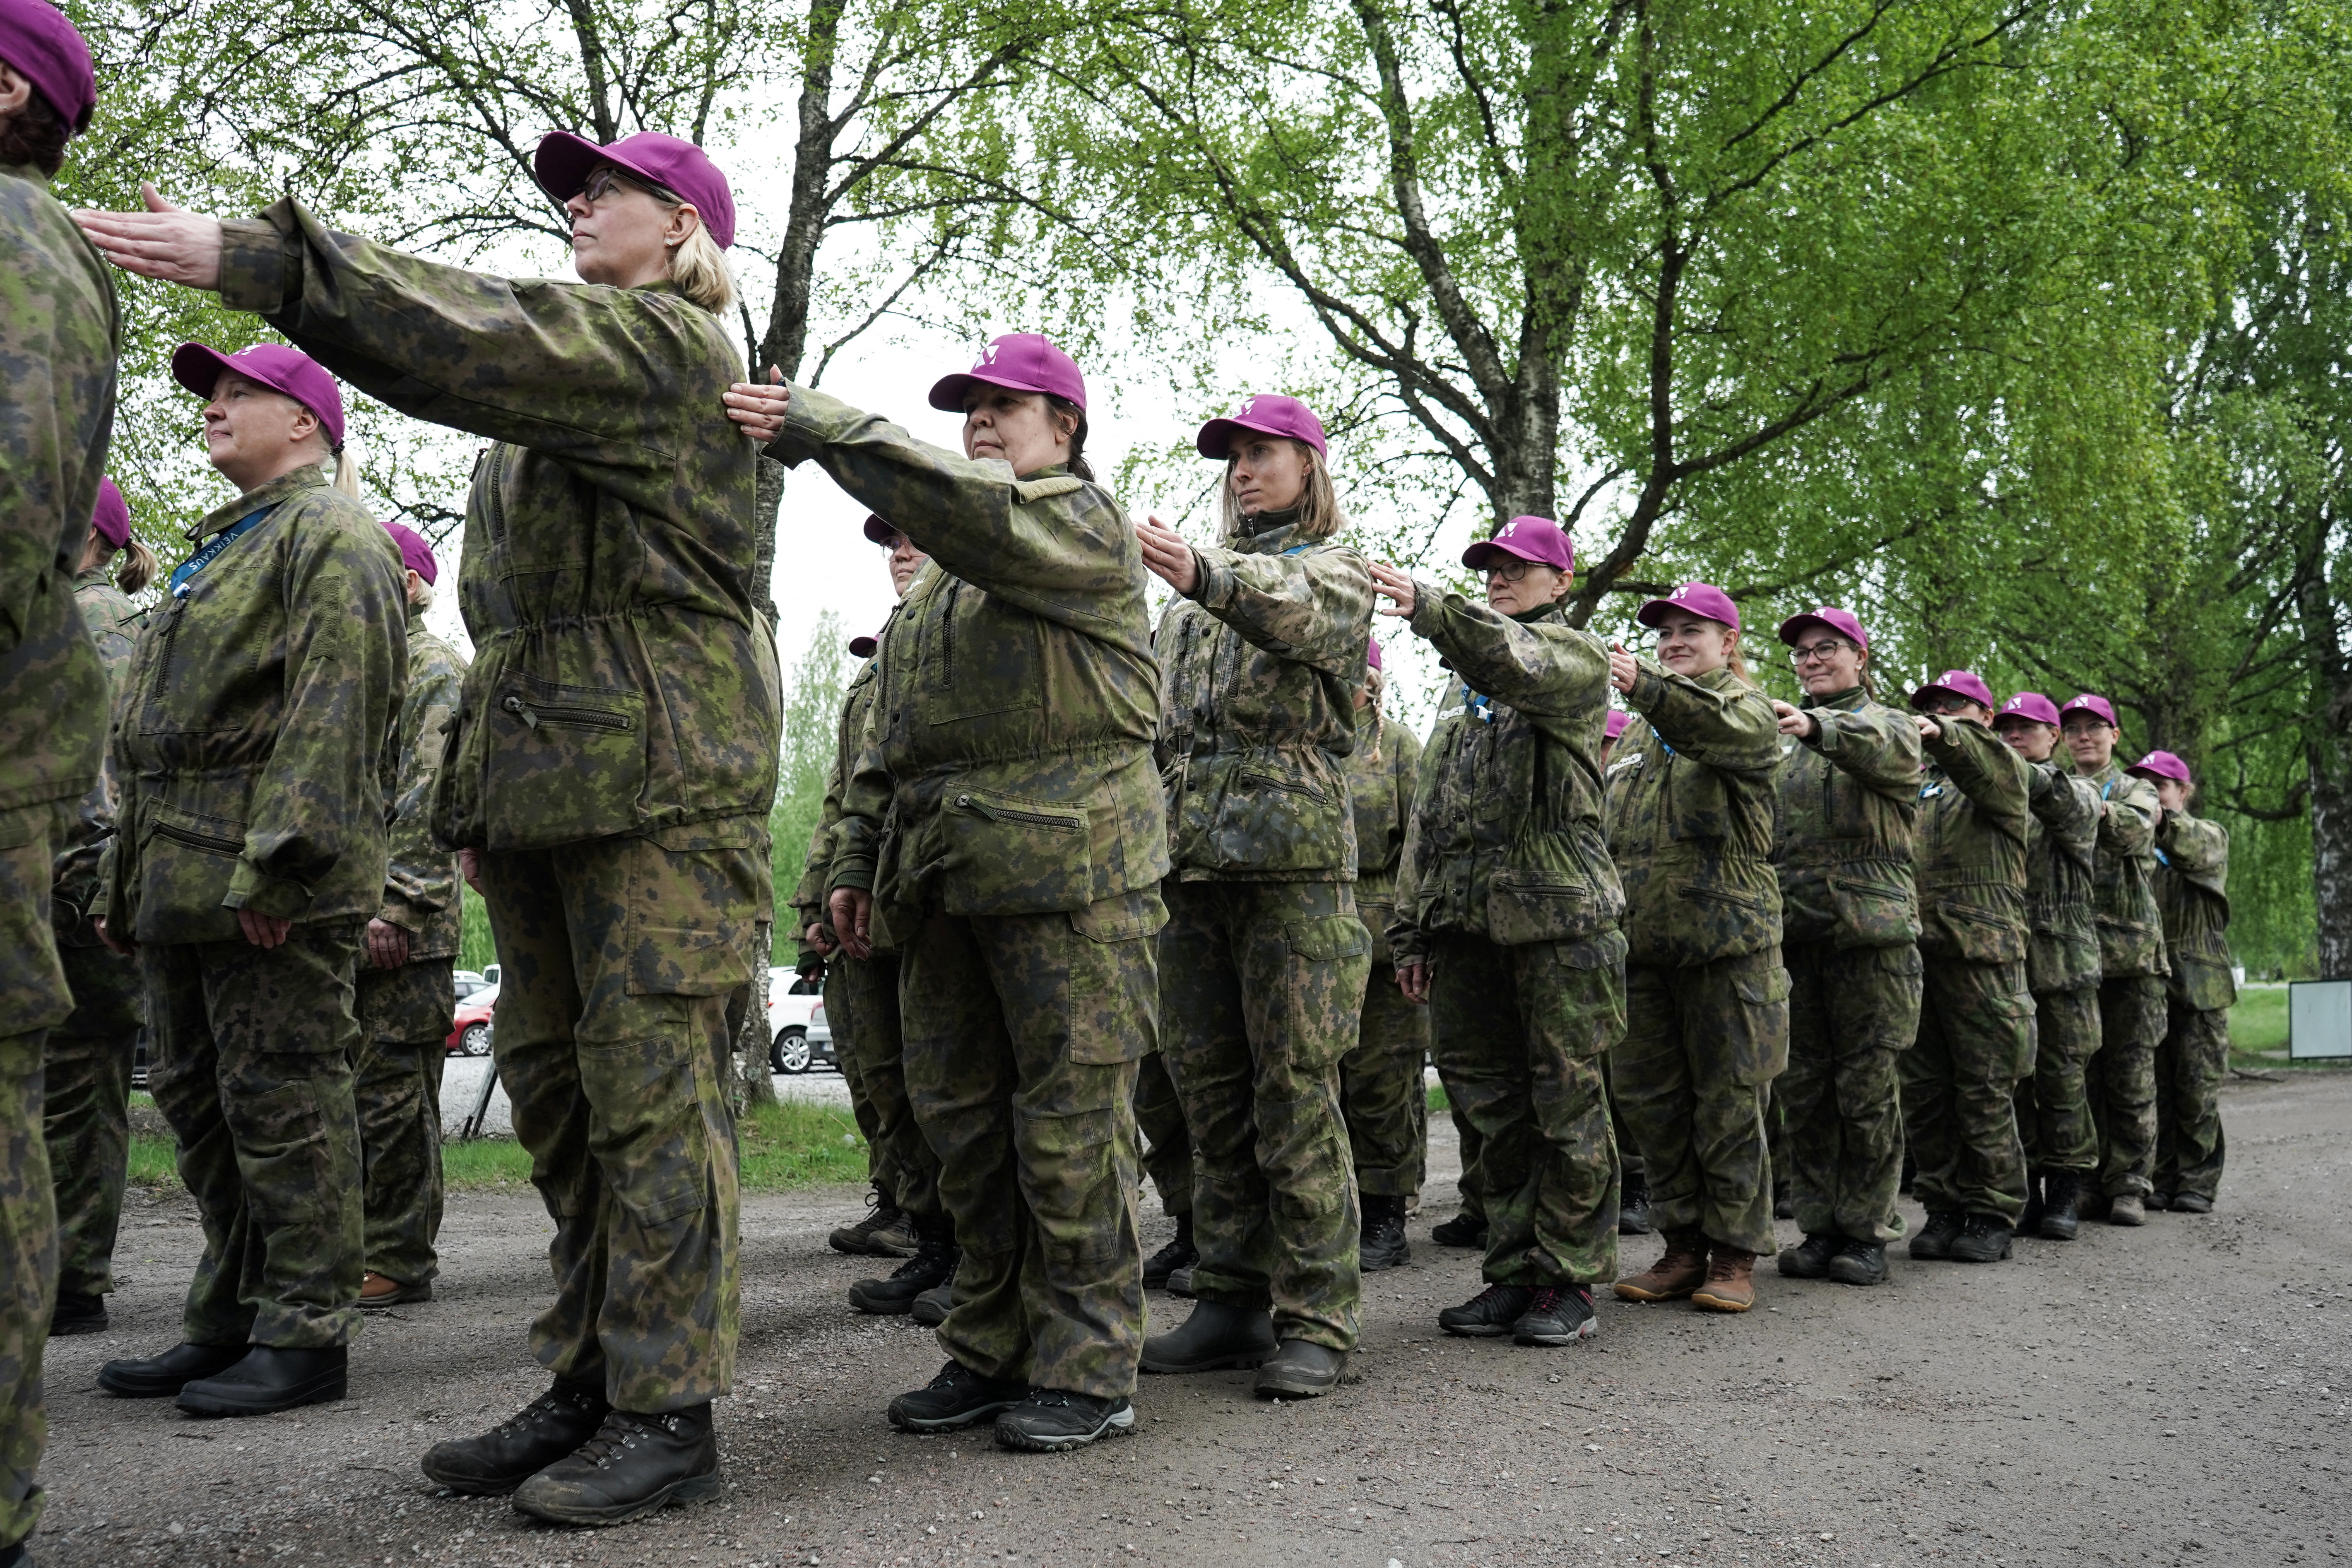 Worried about Russia, Finnish women sign up to learn defence skills Reuters photo